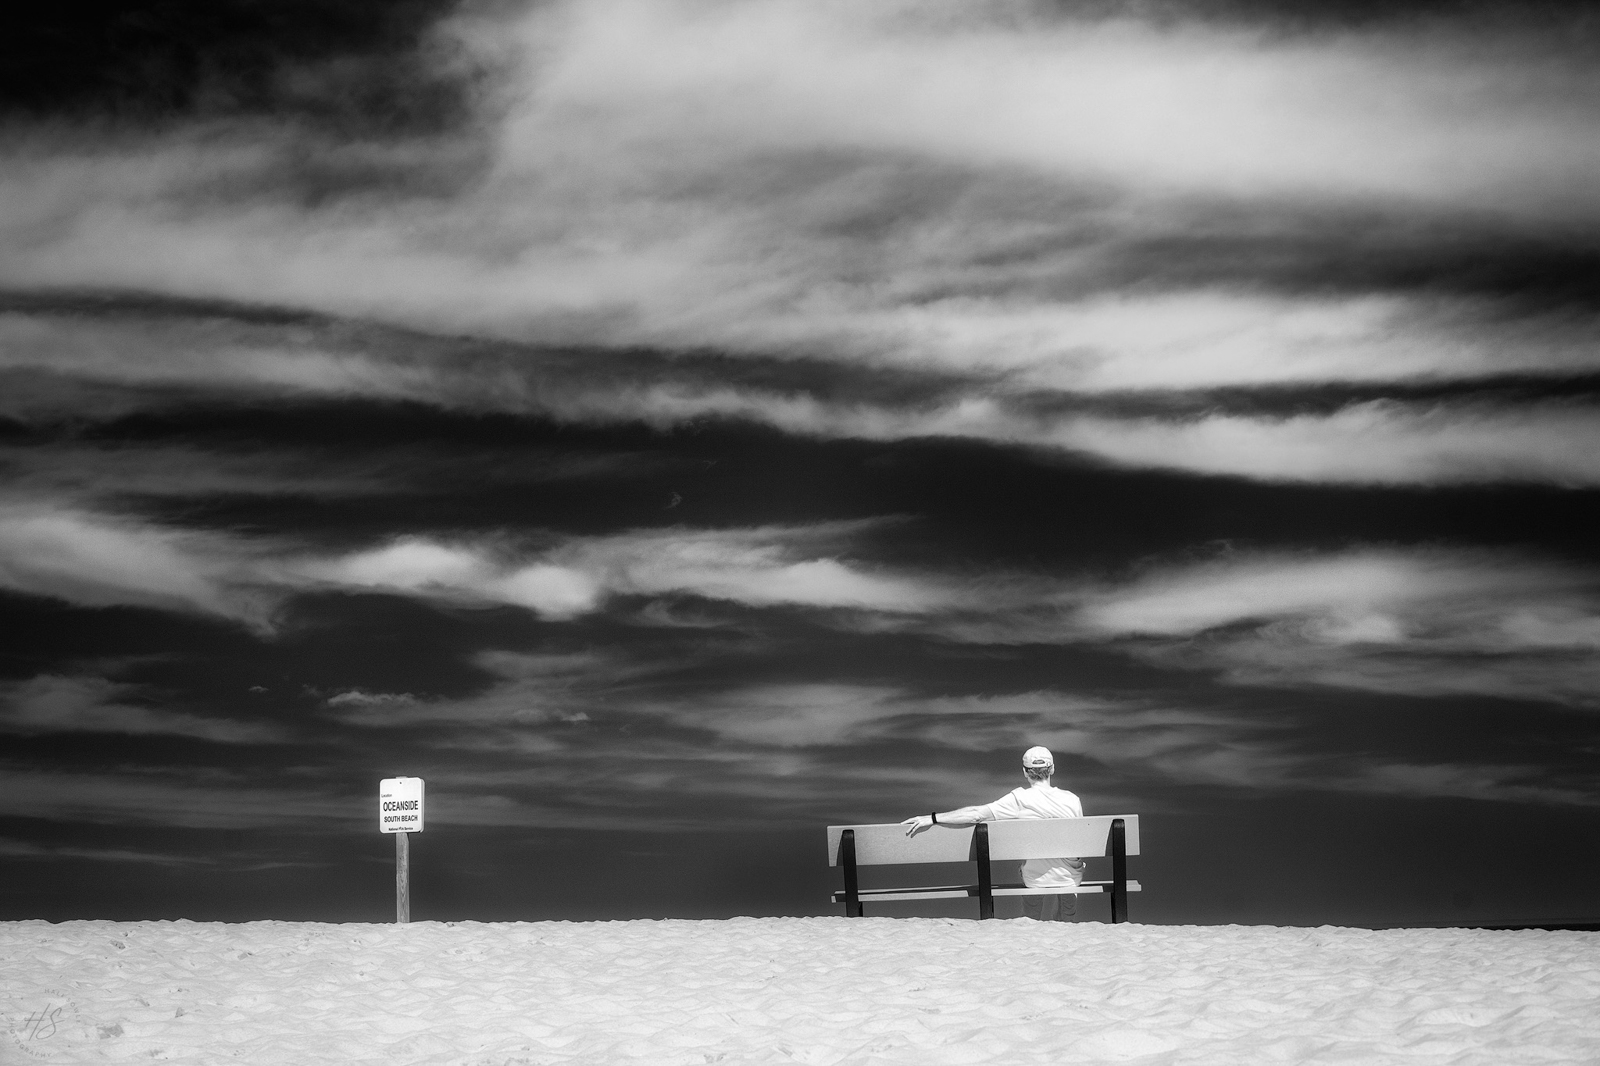 2021_05_Assateague-11026-Edit2048.jpg - Waiting and Watching.  Okay, maybe not.  Maybe I just asked Mike to go sit on that bench because I liked the clouds and had my IR camera in my hand and wanted to get a cool shot on the beach.